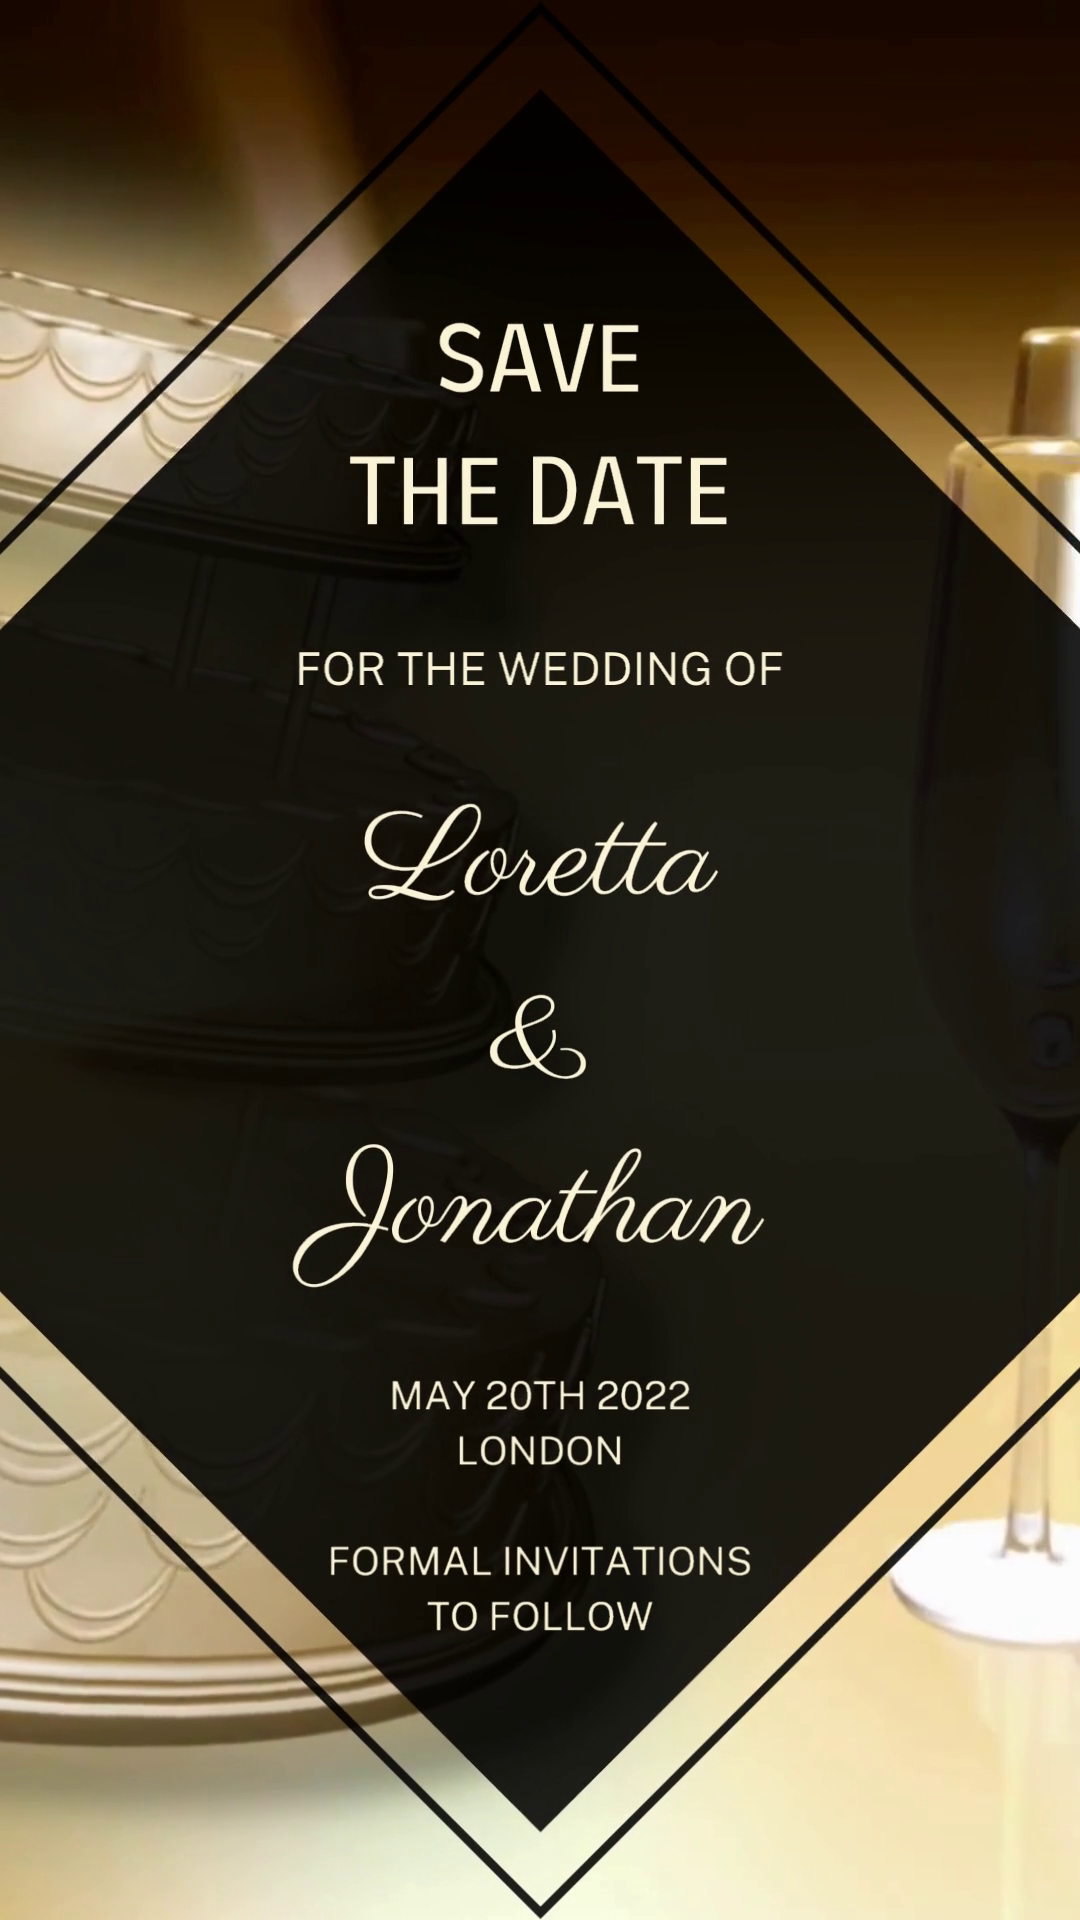 Champagne Cake Themed | Save The Date Video Invitation template featuring black and gold design, customizable text, and editable via Canva for digital sharing.